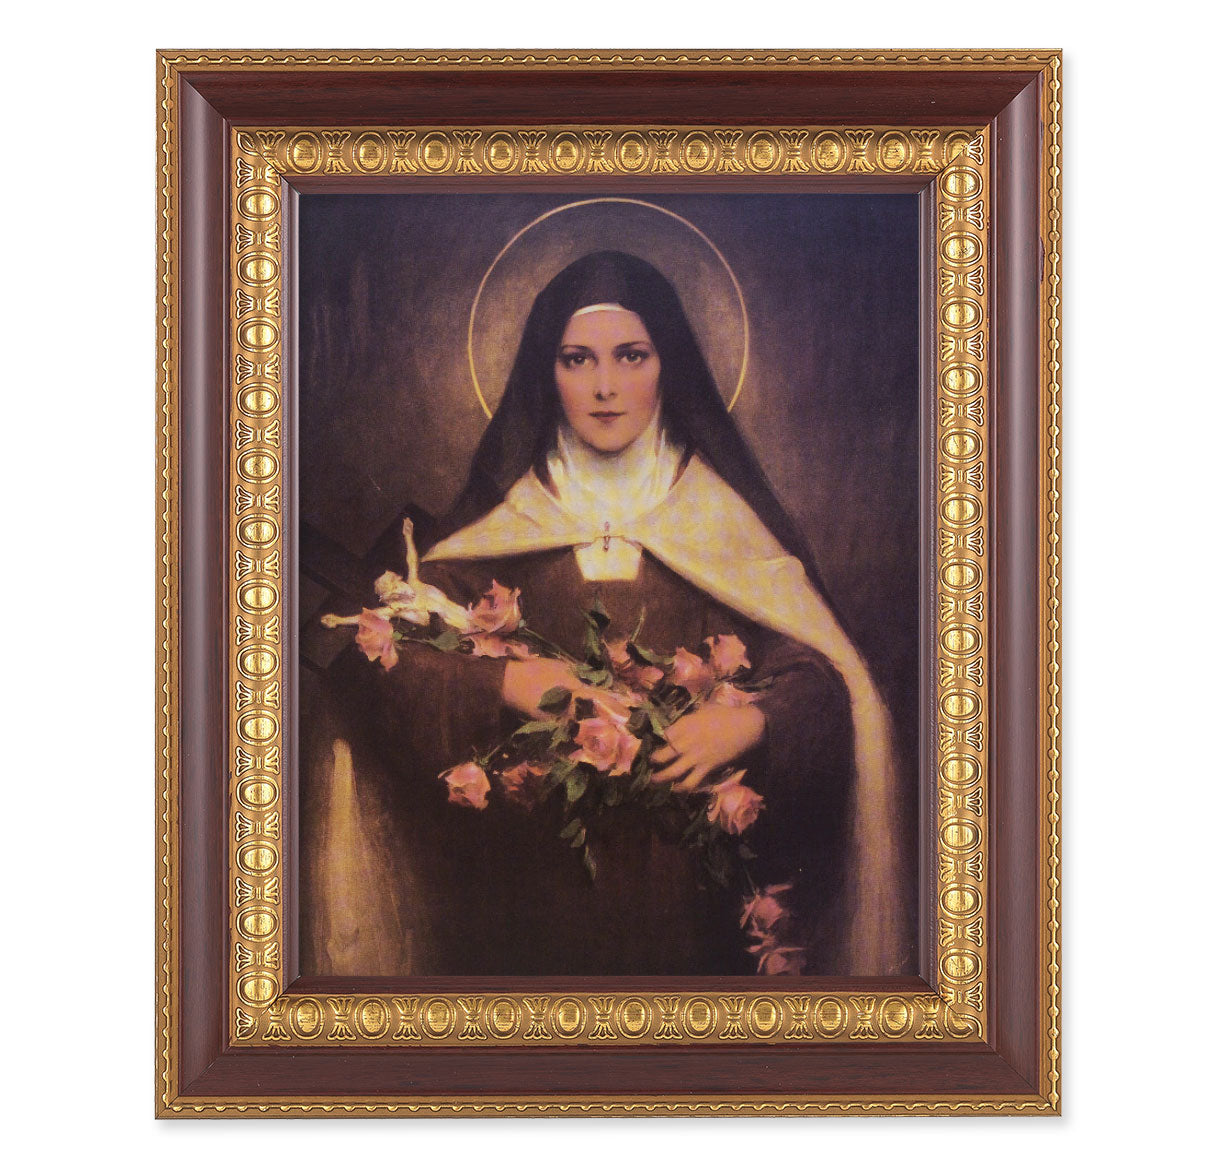 St. Therese Picture Framed Wall Art Decor, Large, Dark Cherry with Gold Egg and Dart Detailed Frame